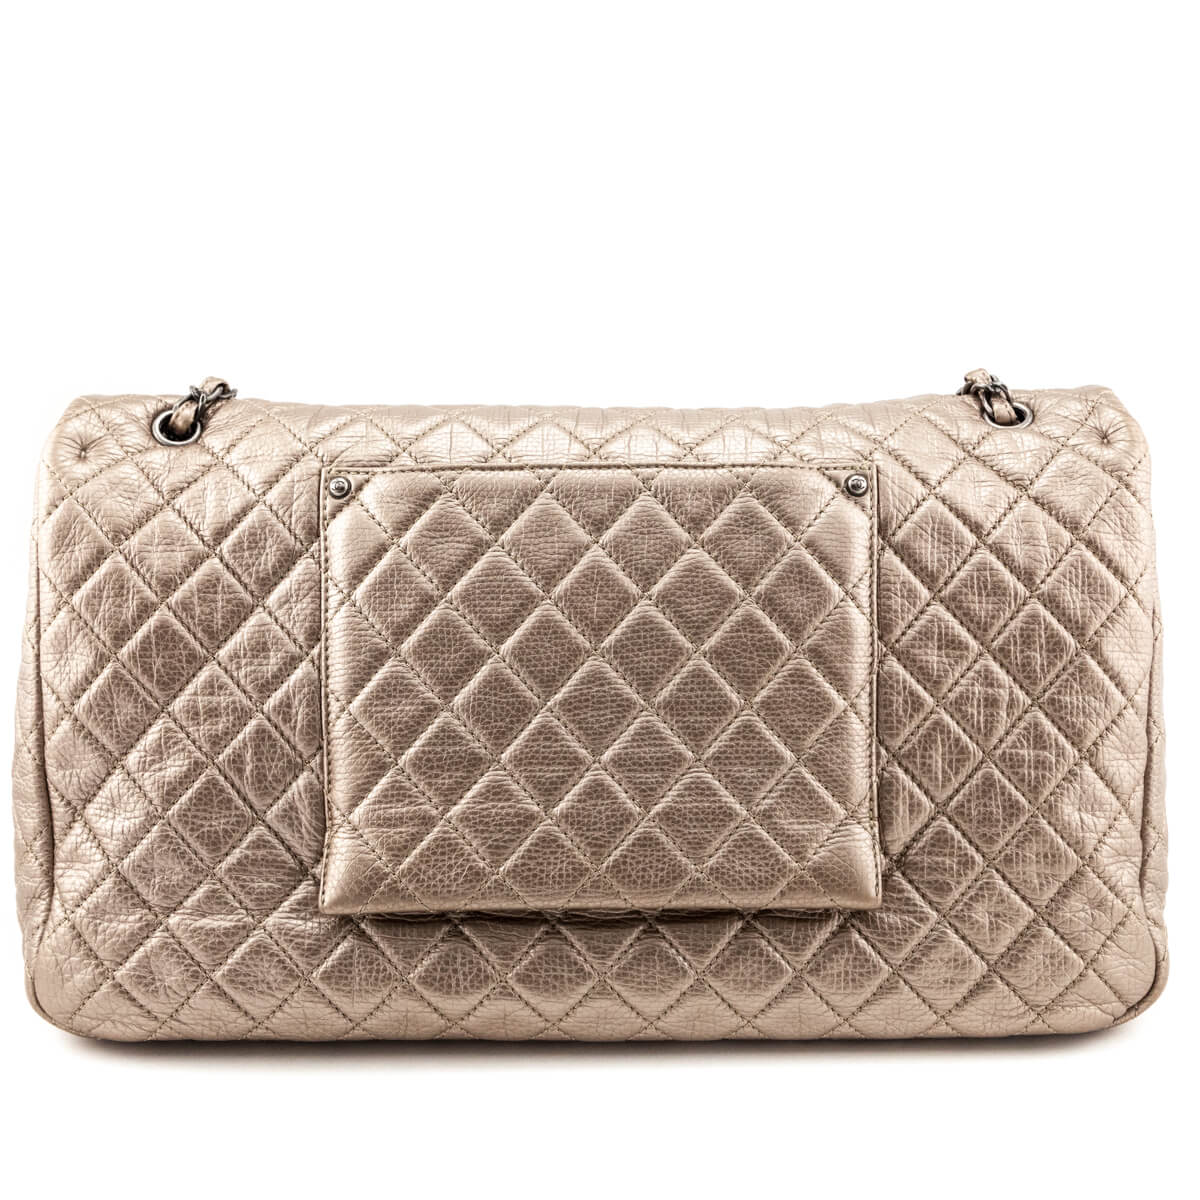 Chanel Pale Gold Metallic Calfskin Quilted XXL Travel Flap Bag - Love that Bag etc - Preowned Authentic Designer Handbags & Preloved Fashions